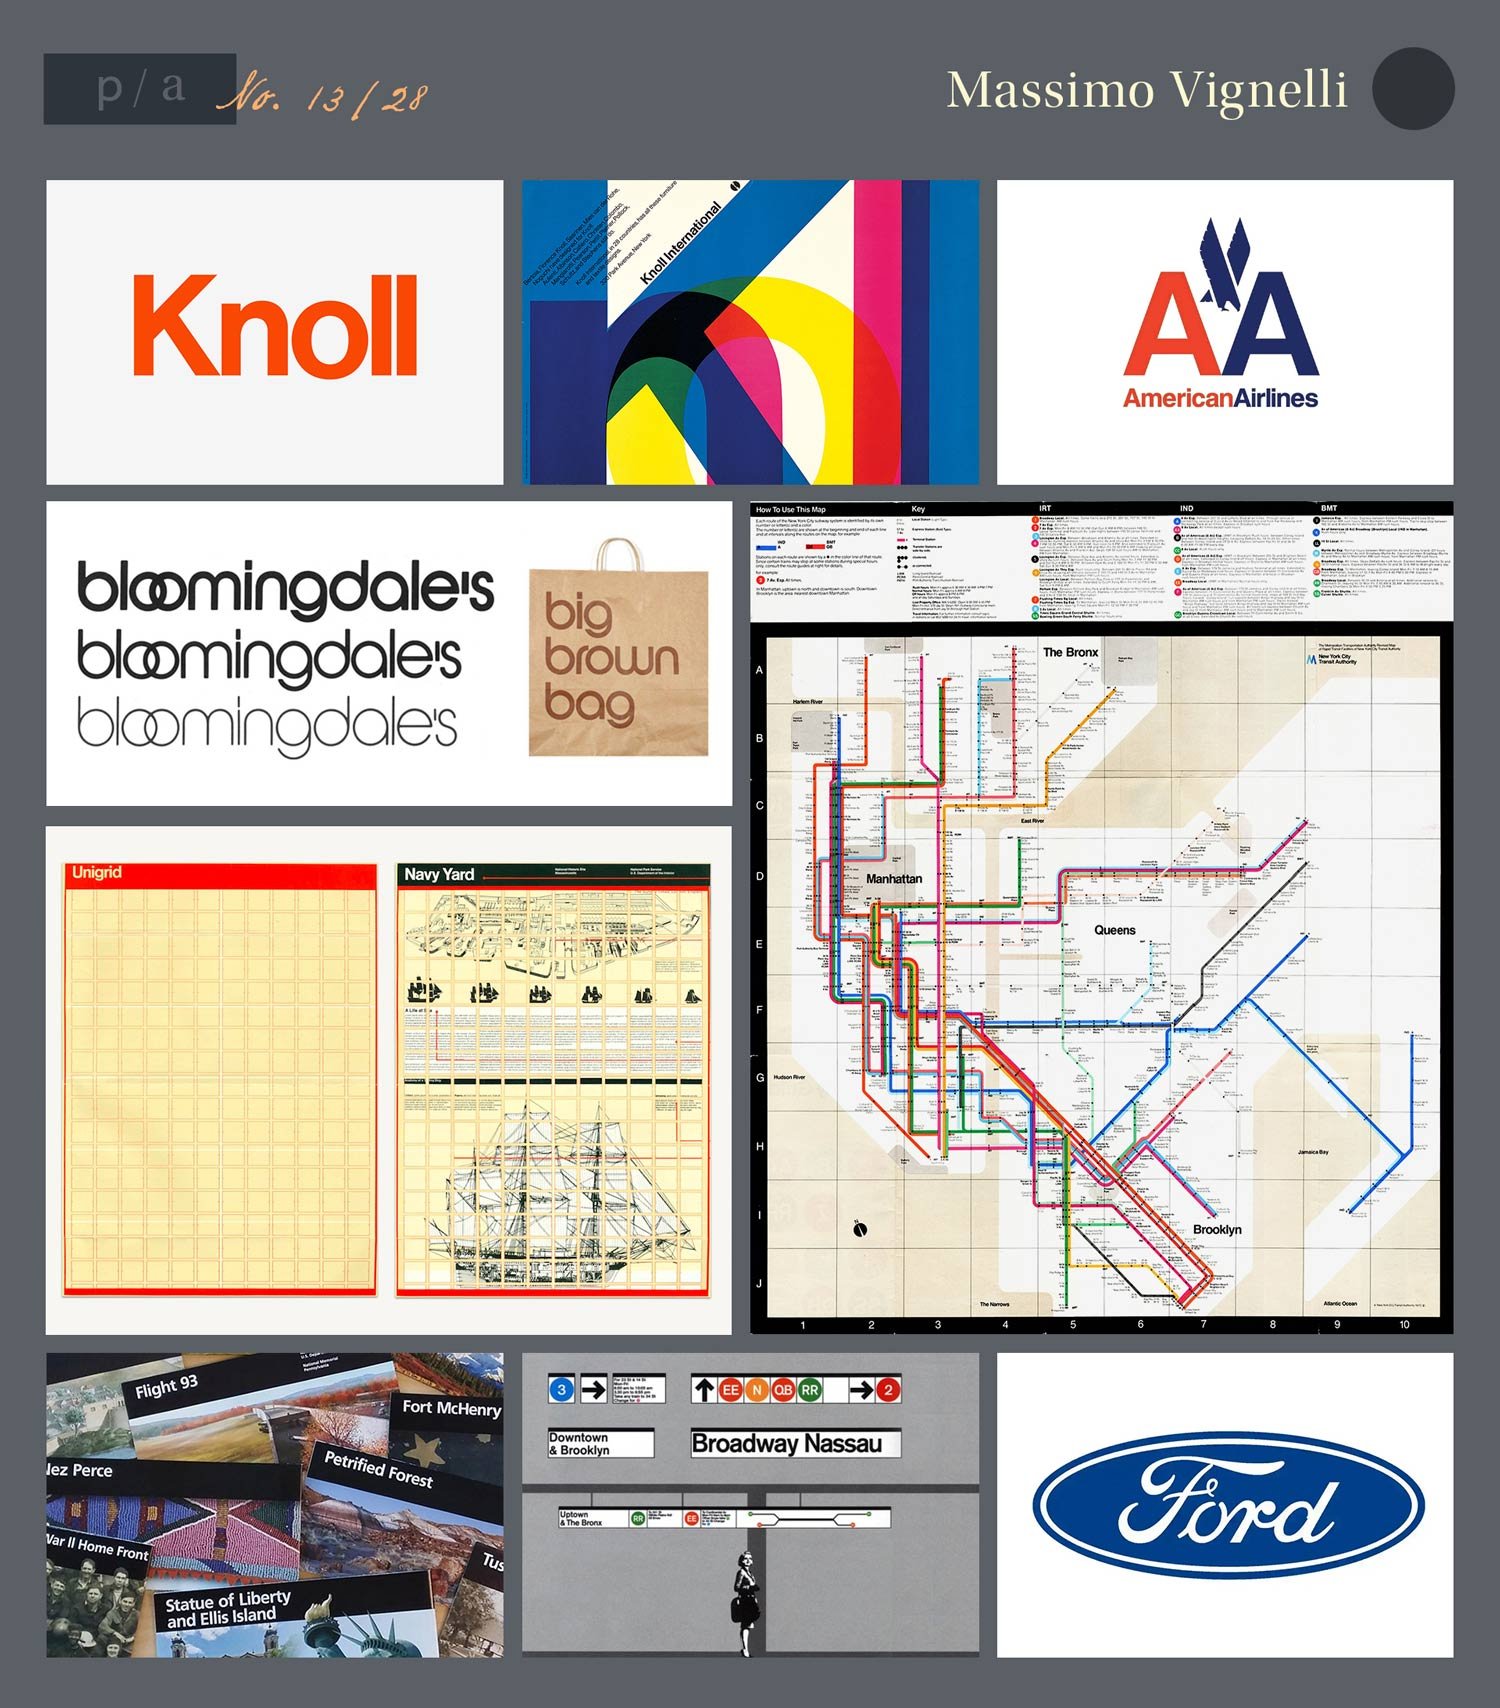 Examples of Massimo Vignelli's brand identity work, including Ford, American Airlines, and the New York Subway System map.